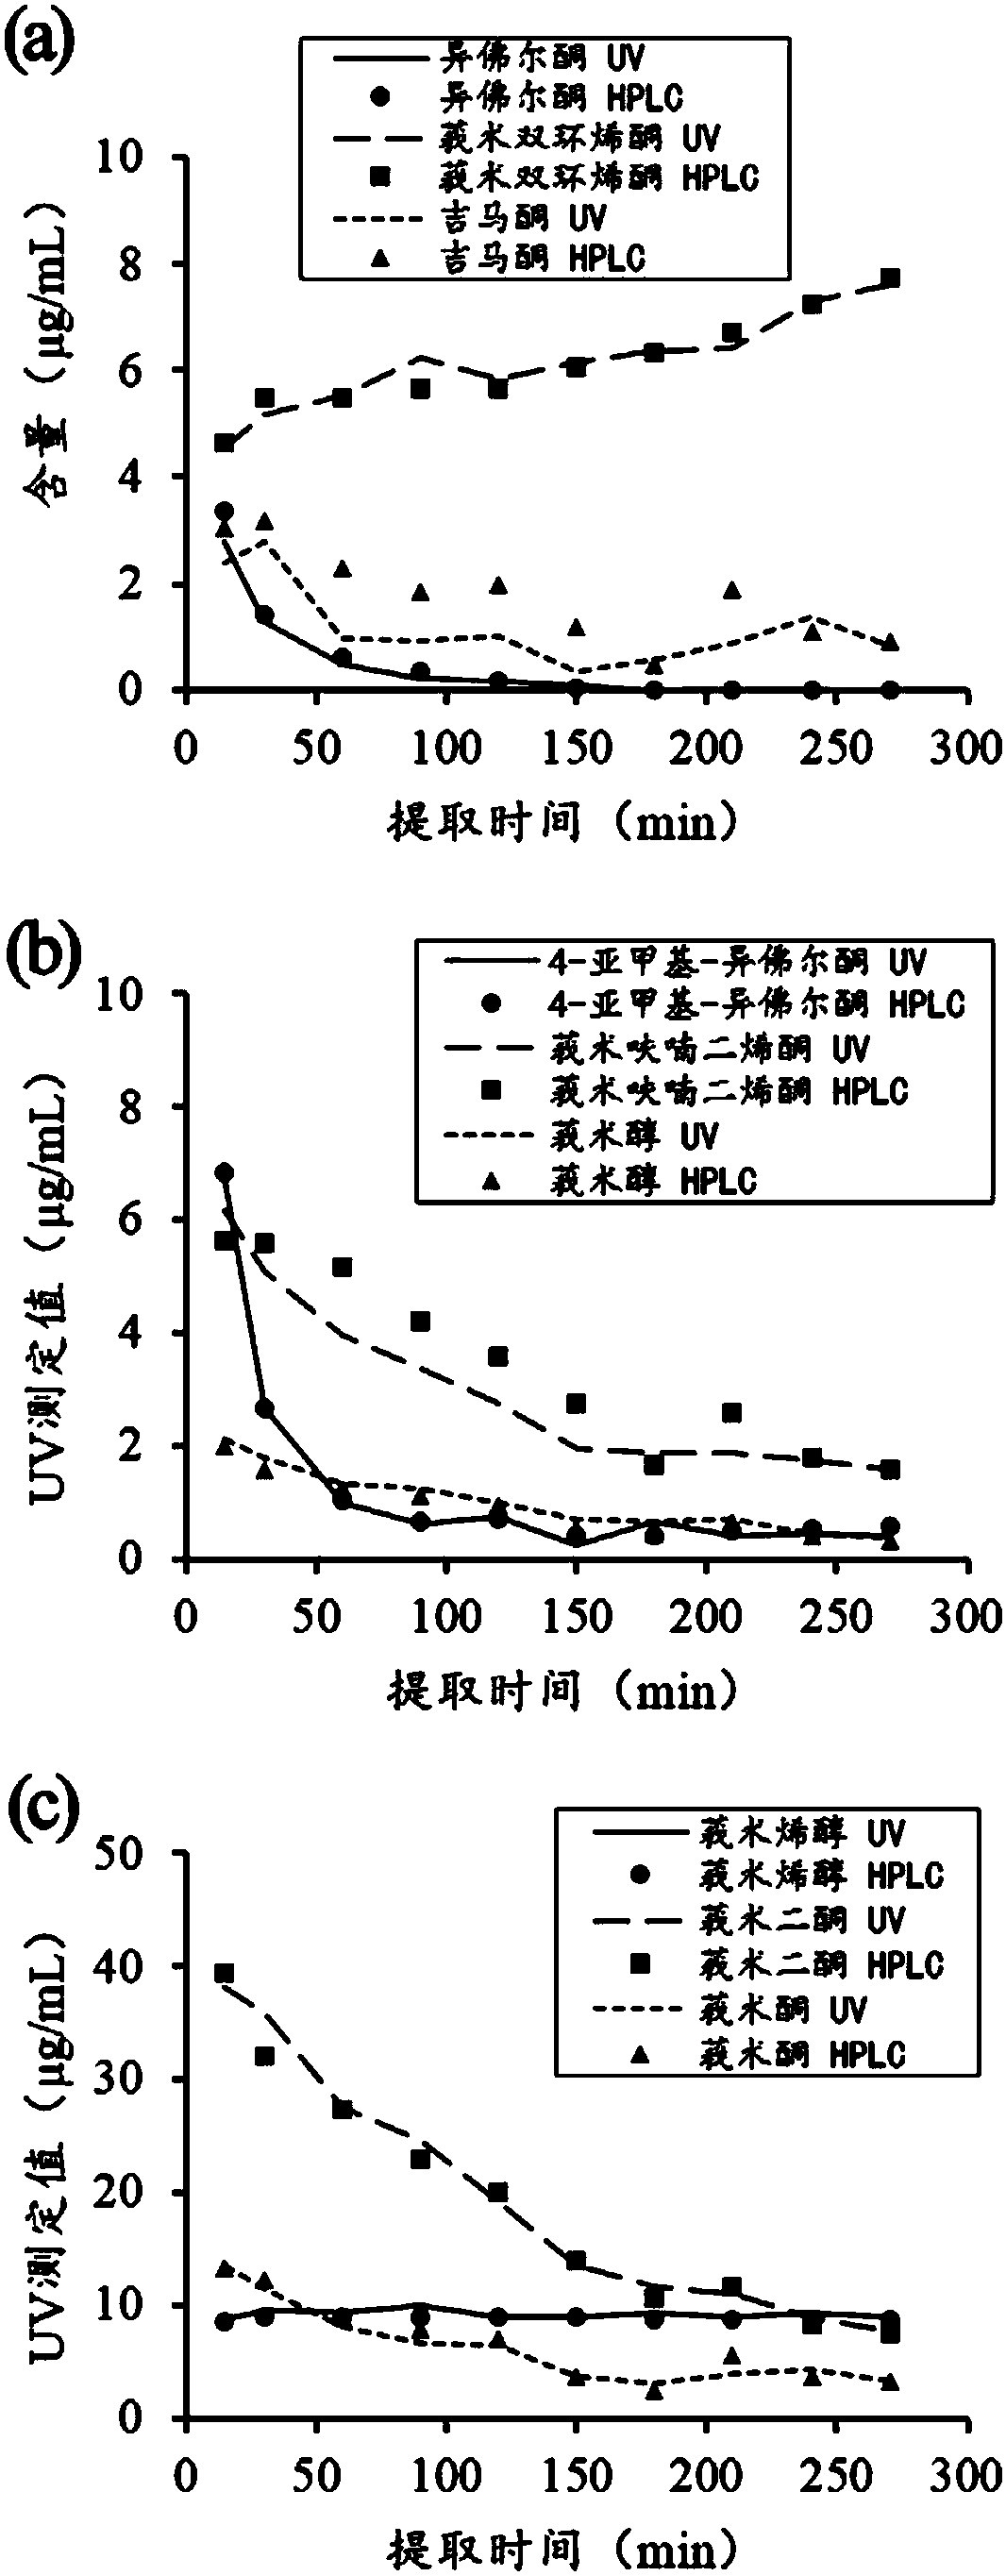 Method for rapidly testing multiple component contents in radix curcumae-jasmine steam distillation and extracting process based on ultraviolet spectrum